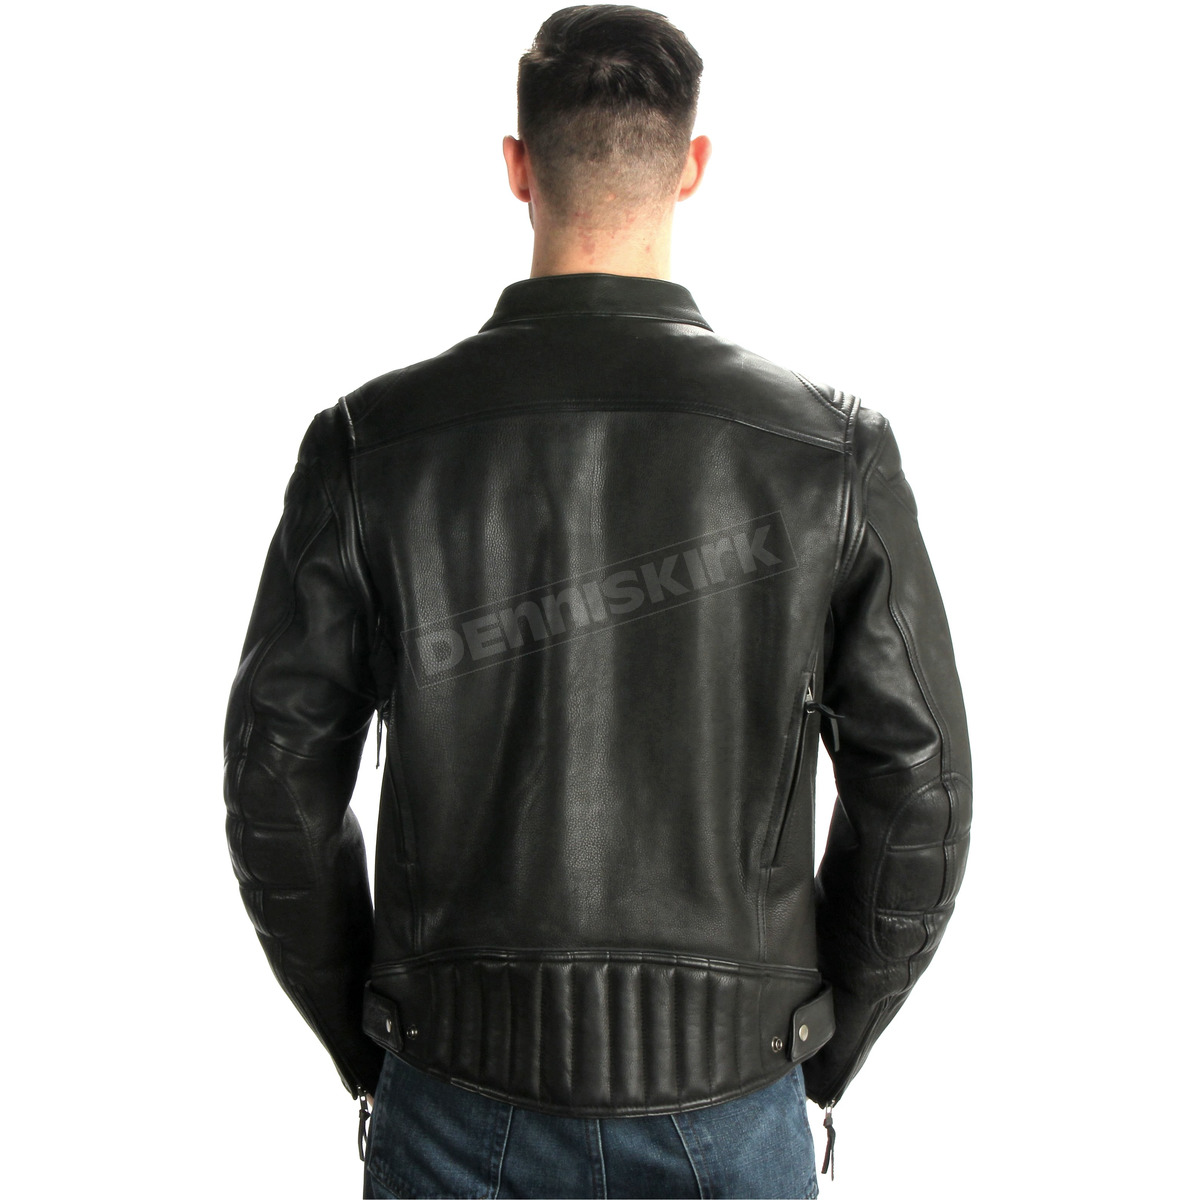 First MFG Co Mens Motorcycle Leather Jacket - Top Performer Black, 4X-Large 